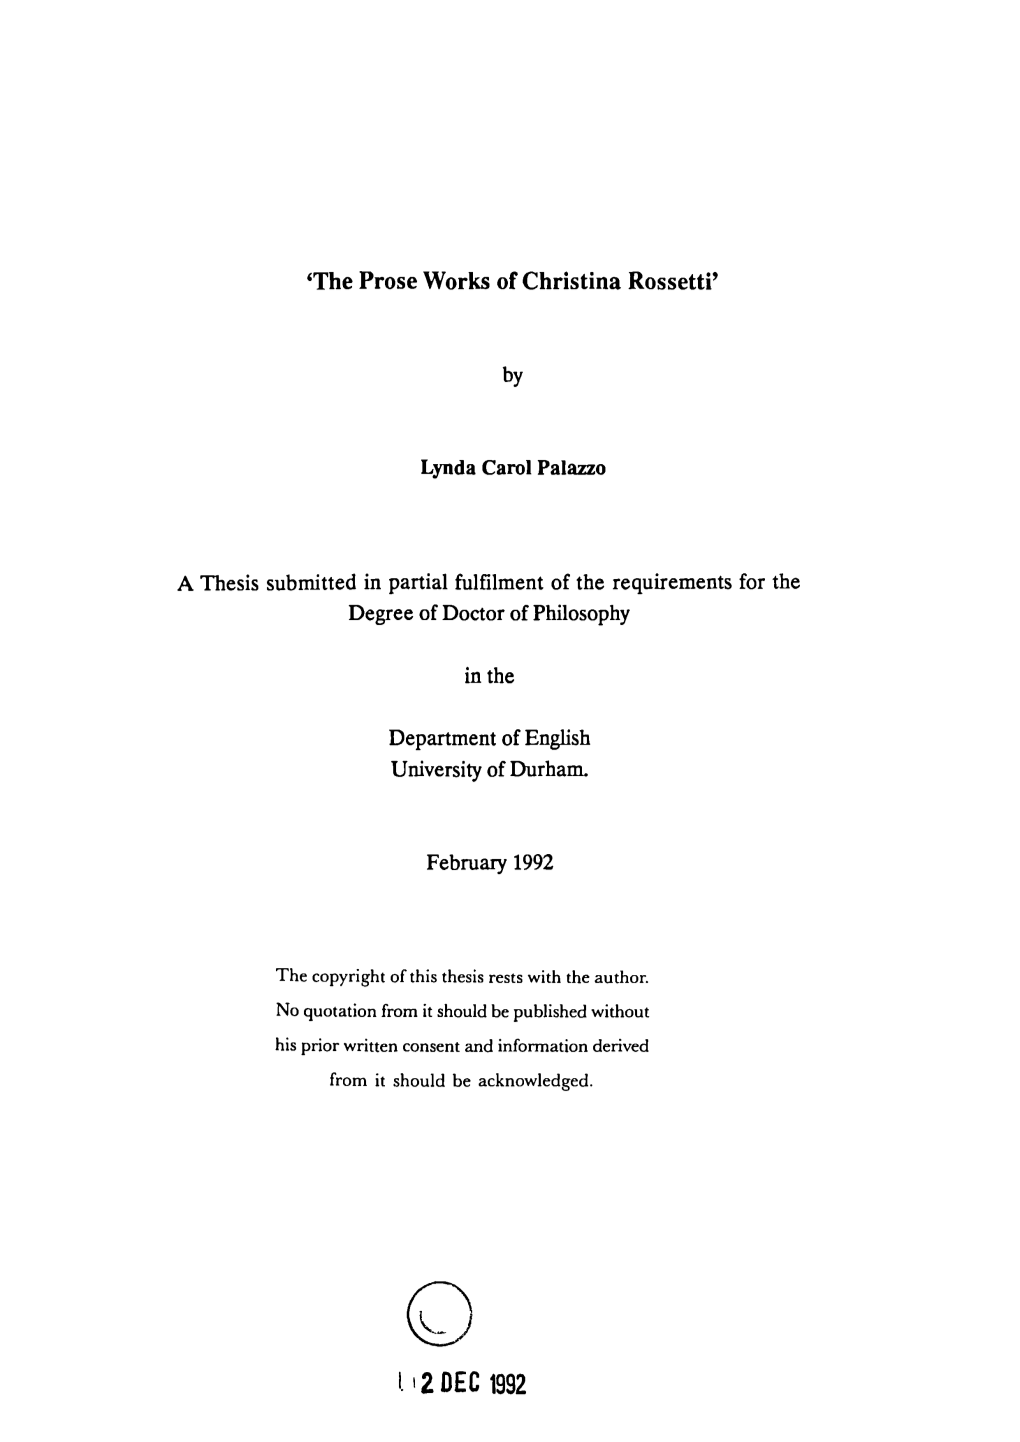 'The Prose Works of Christina Rossetti' a Thesis Submitted in Partial Fulfilment of the Requirements for the Degree of Doctor Of